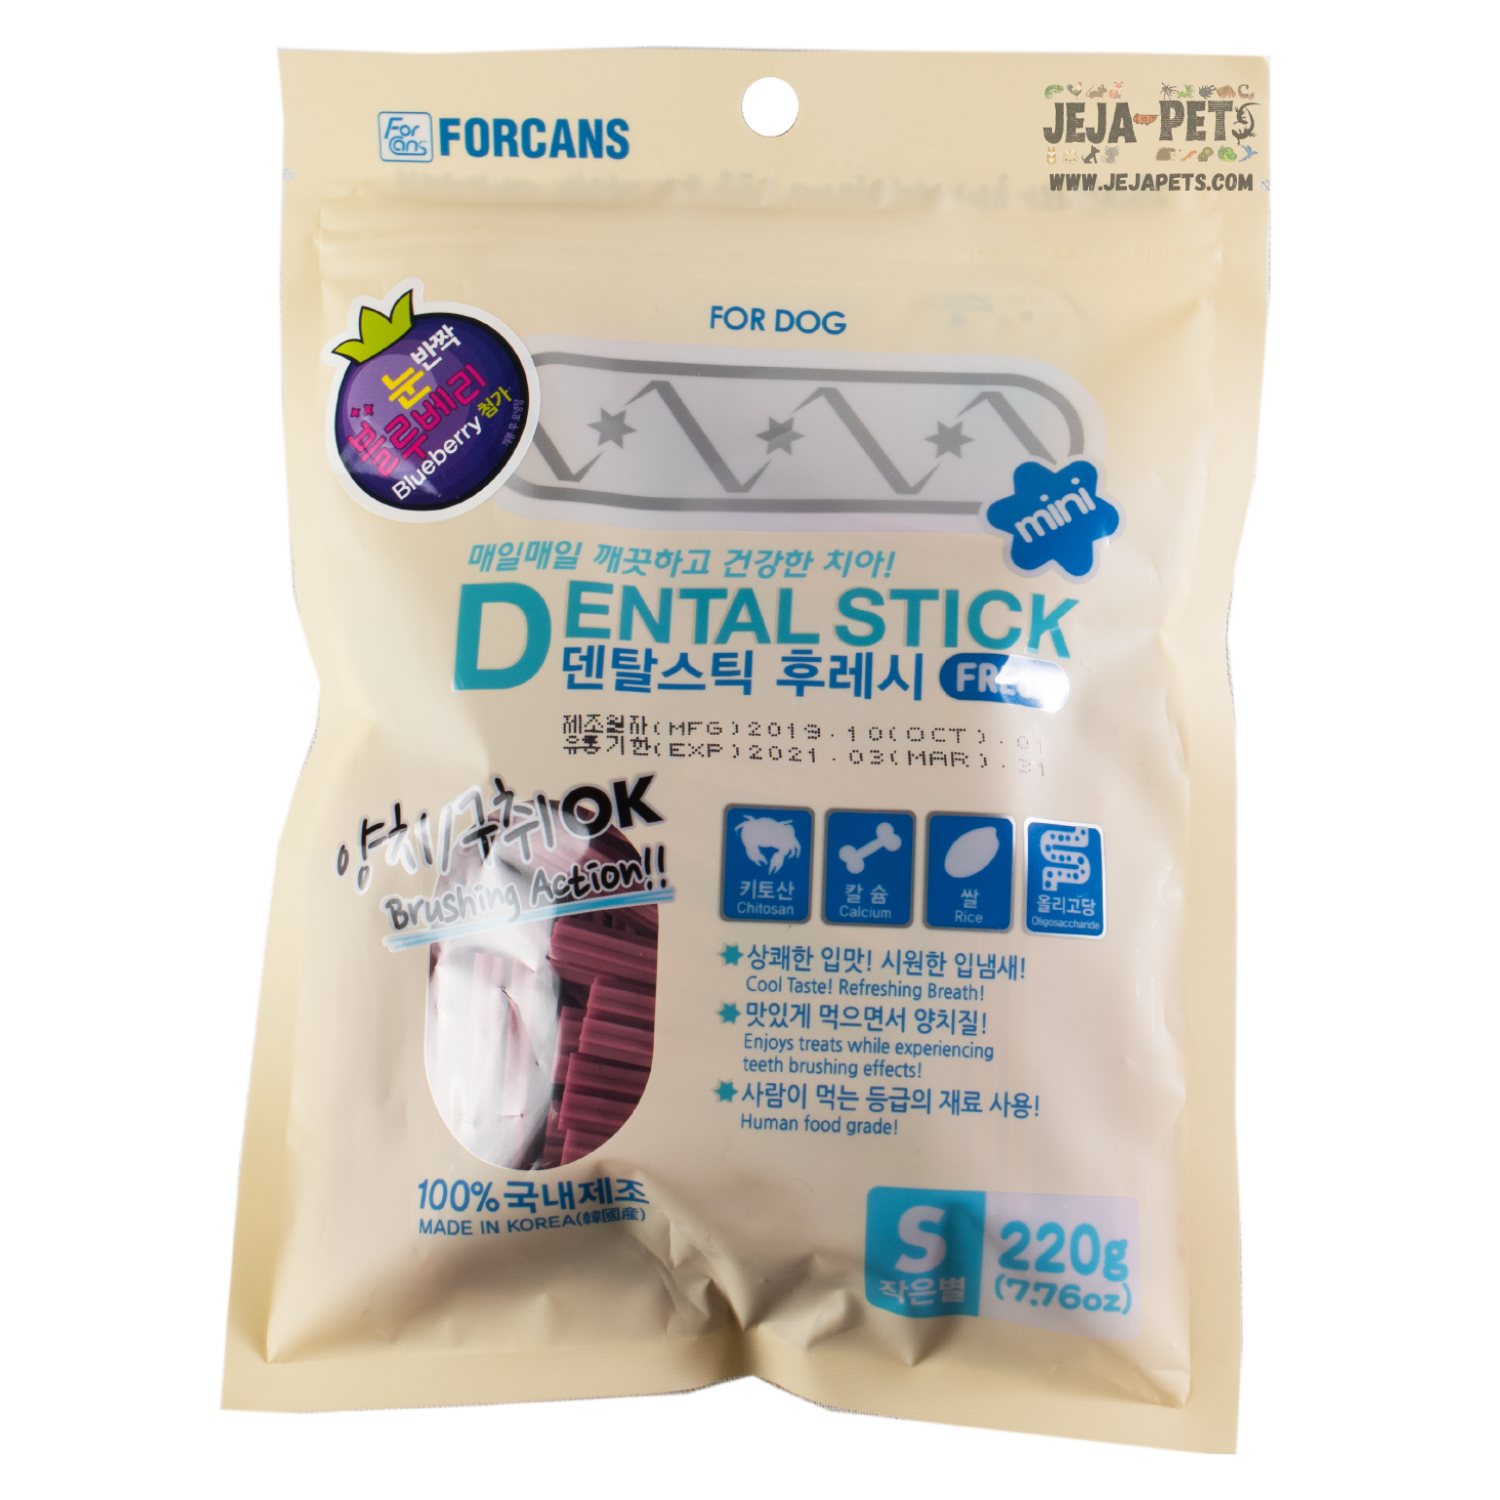 Forcans Dental Stick Fresh with Blueberry - S / M (220g)